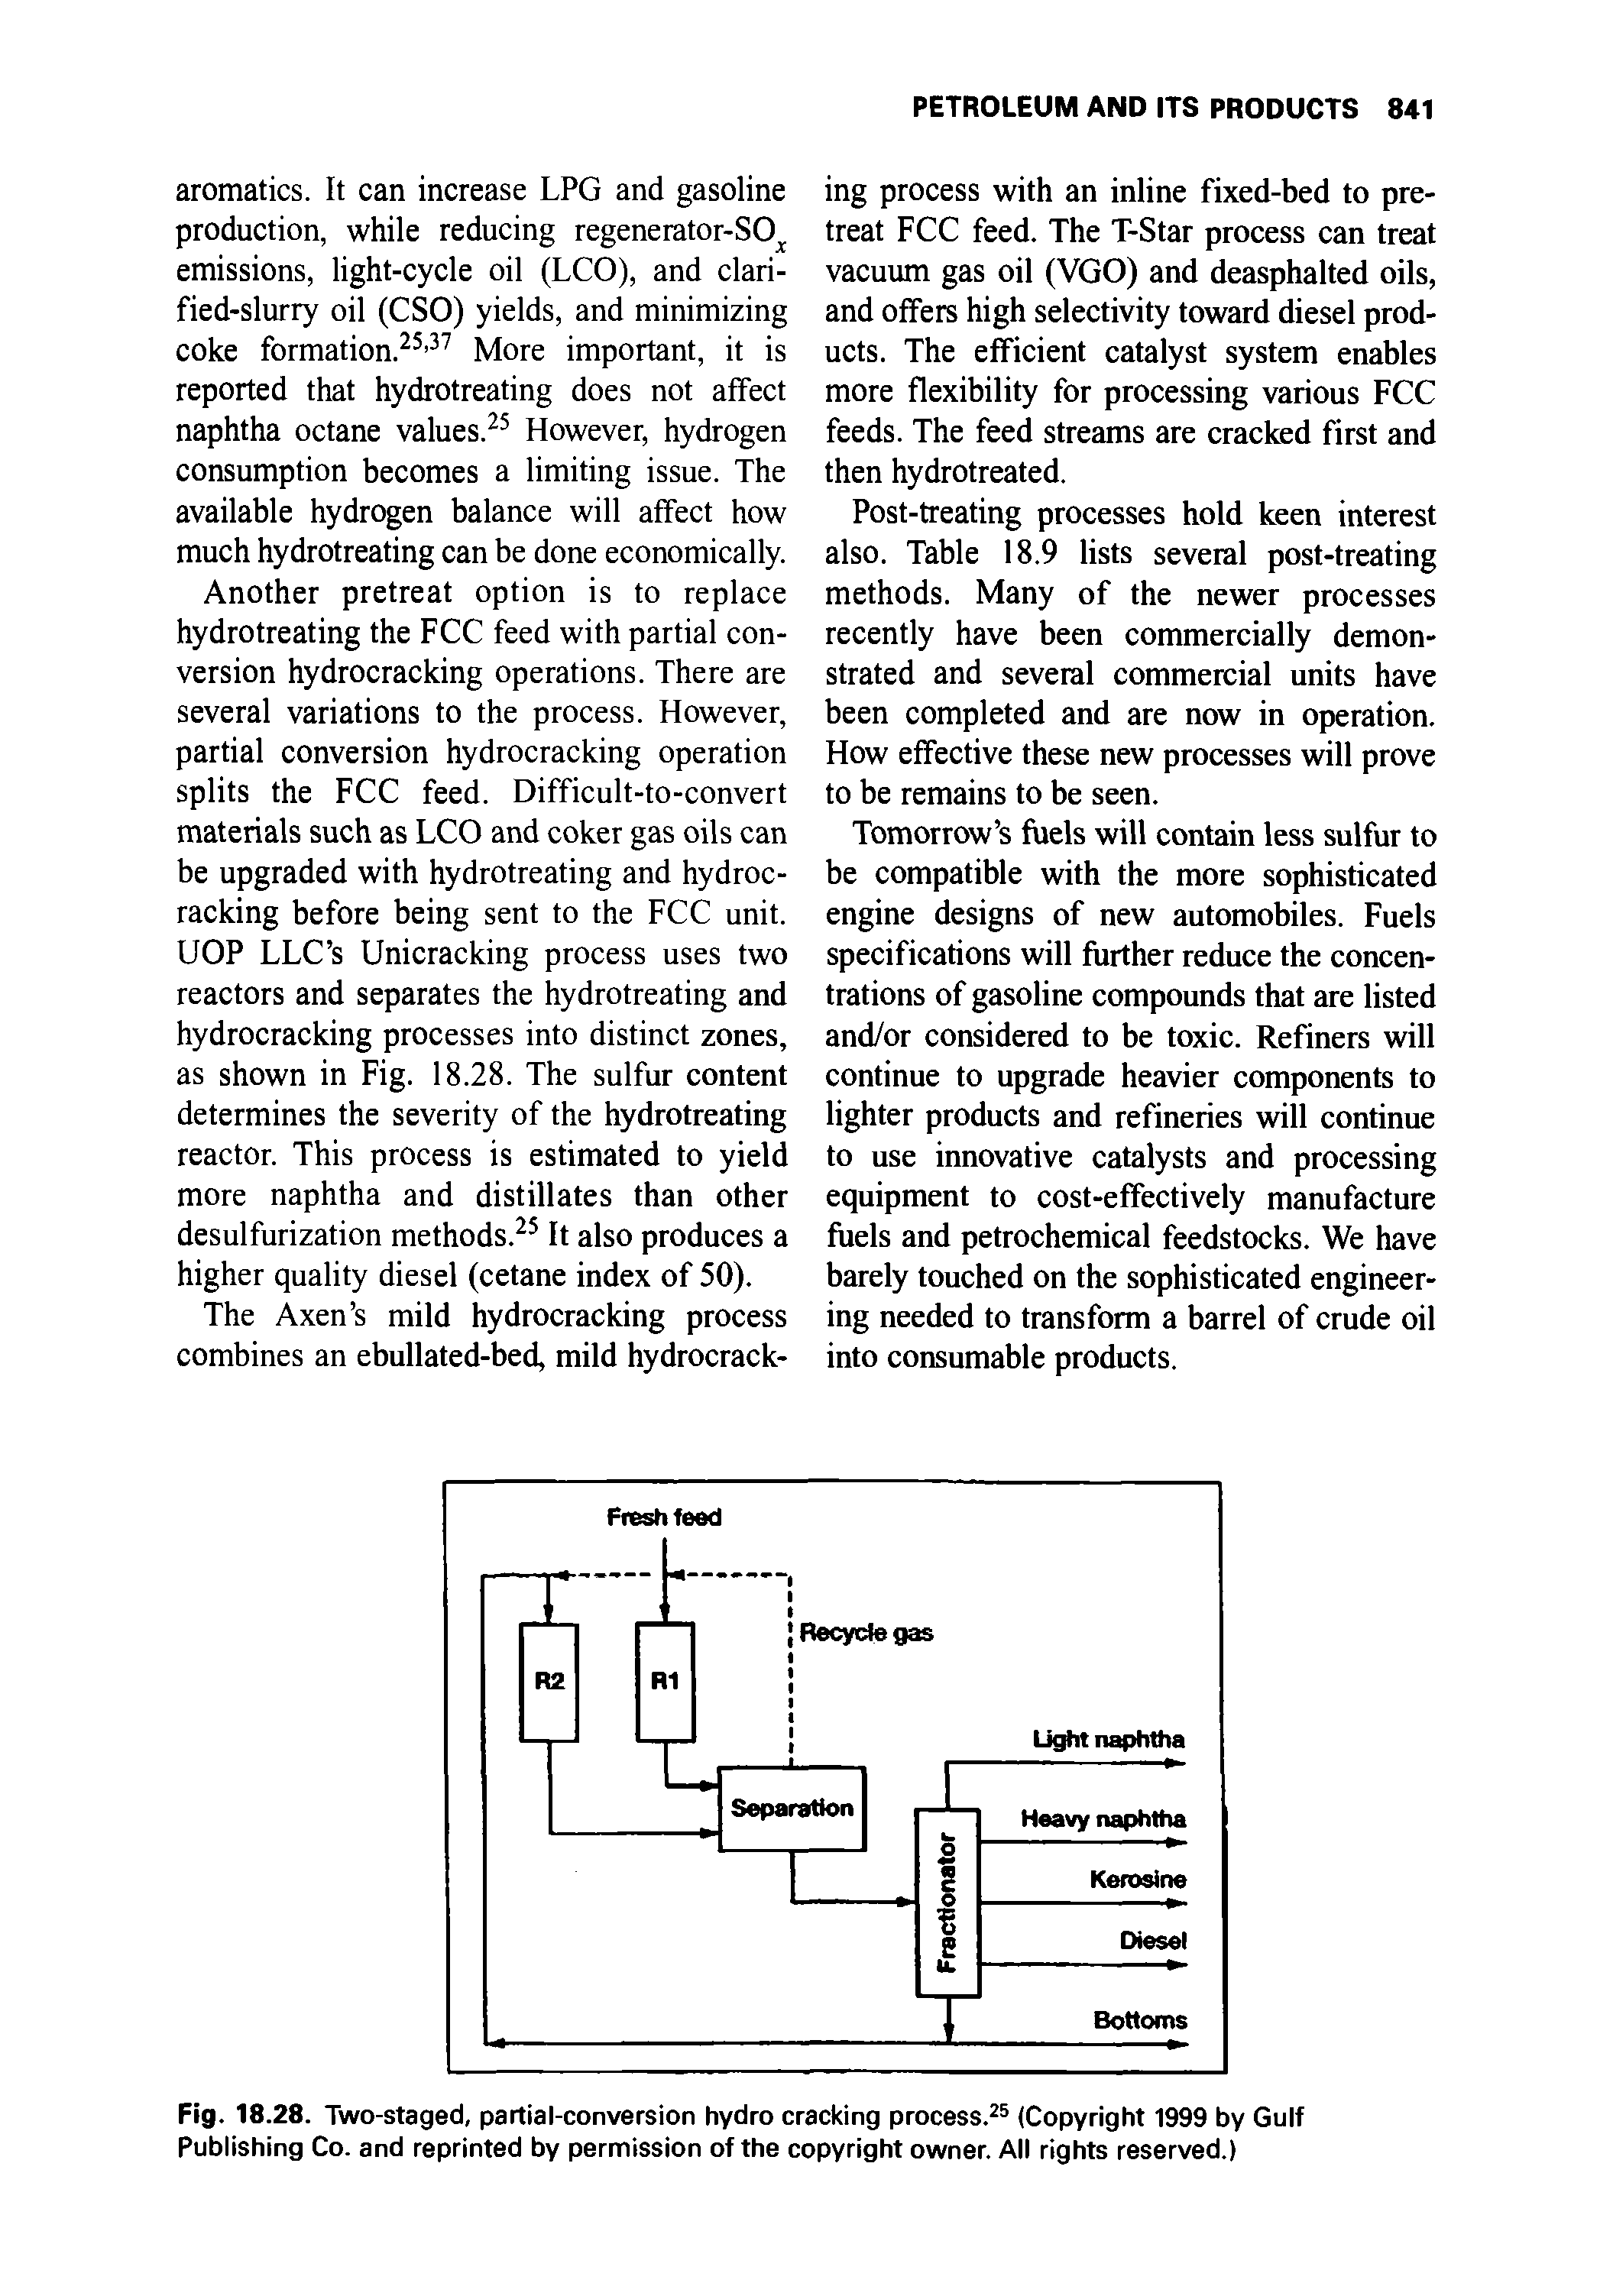 Fig. 18.28. Two-staged, partial-conversion hydro cracking process.25 (Copyright 1999 by Gulf Publishing Co. and reprinted by permission of the copyright owner. All rights reserved.)...